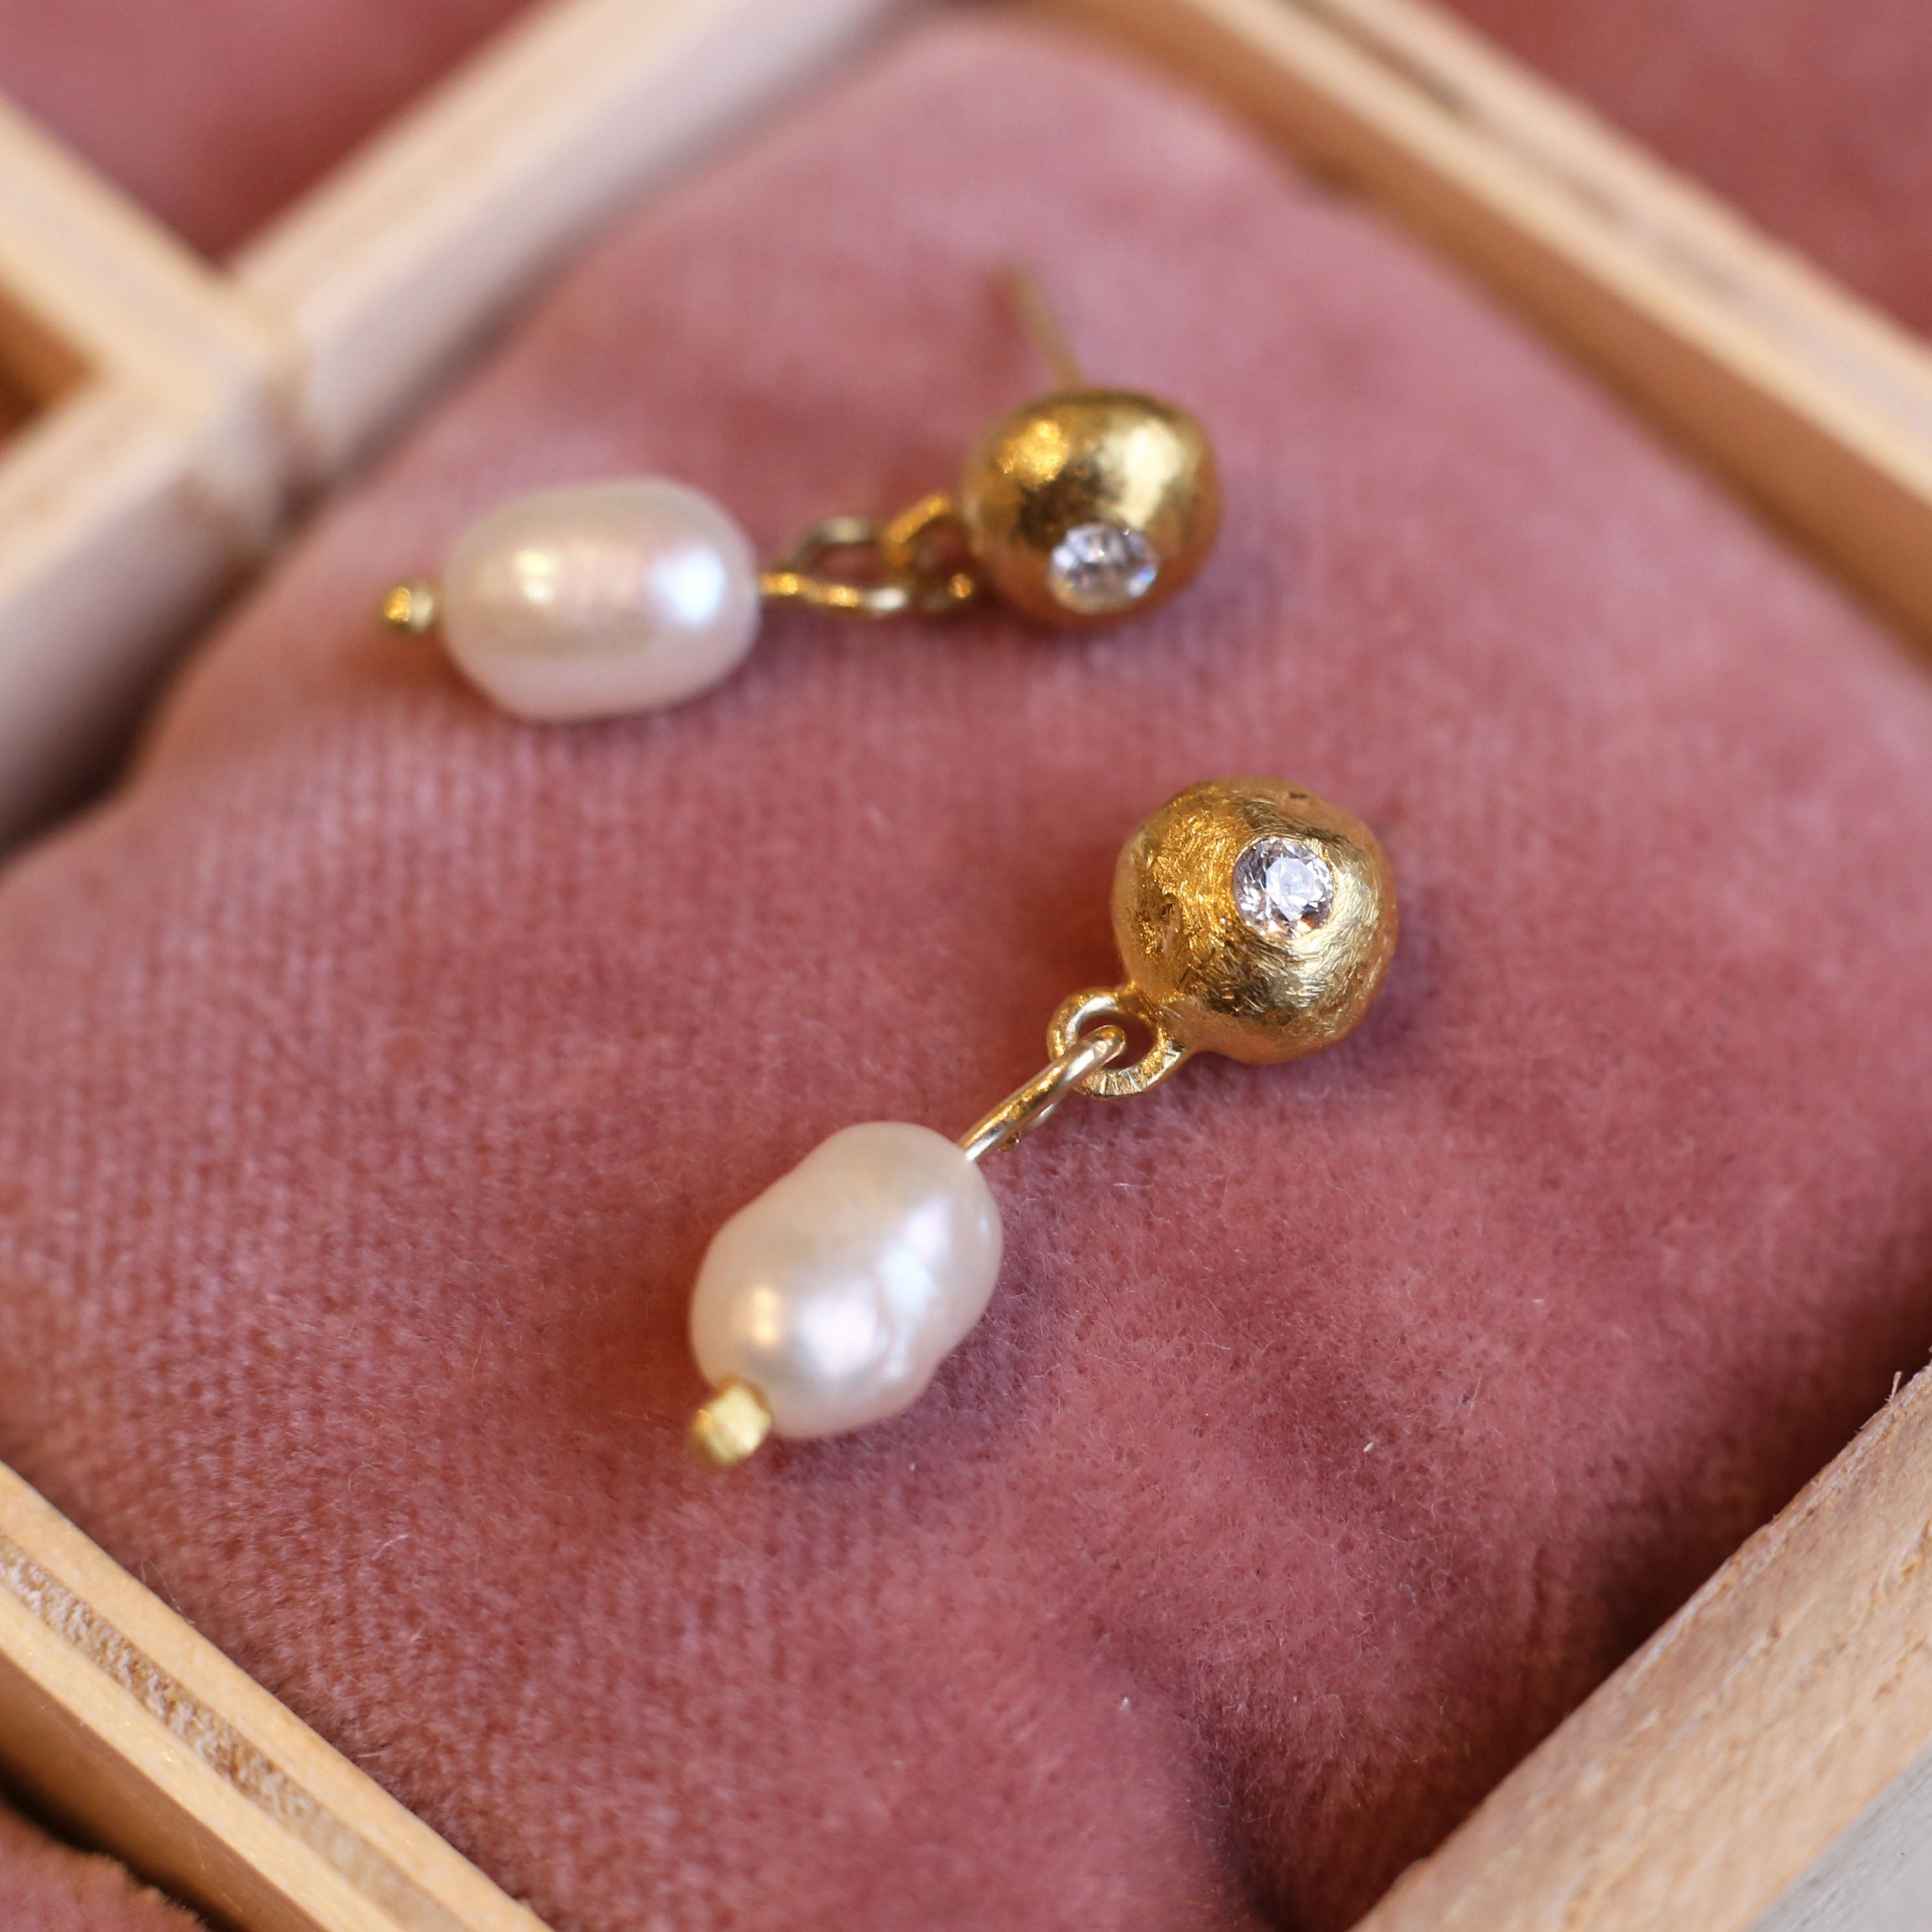 Gold plated, sterling silver earrings with freshwater pearl drops